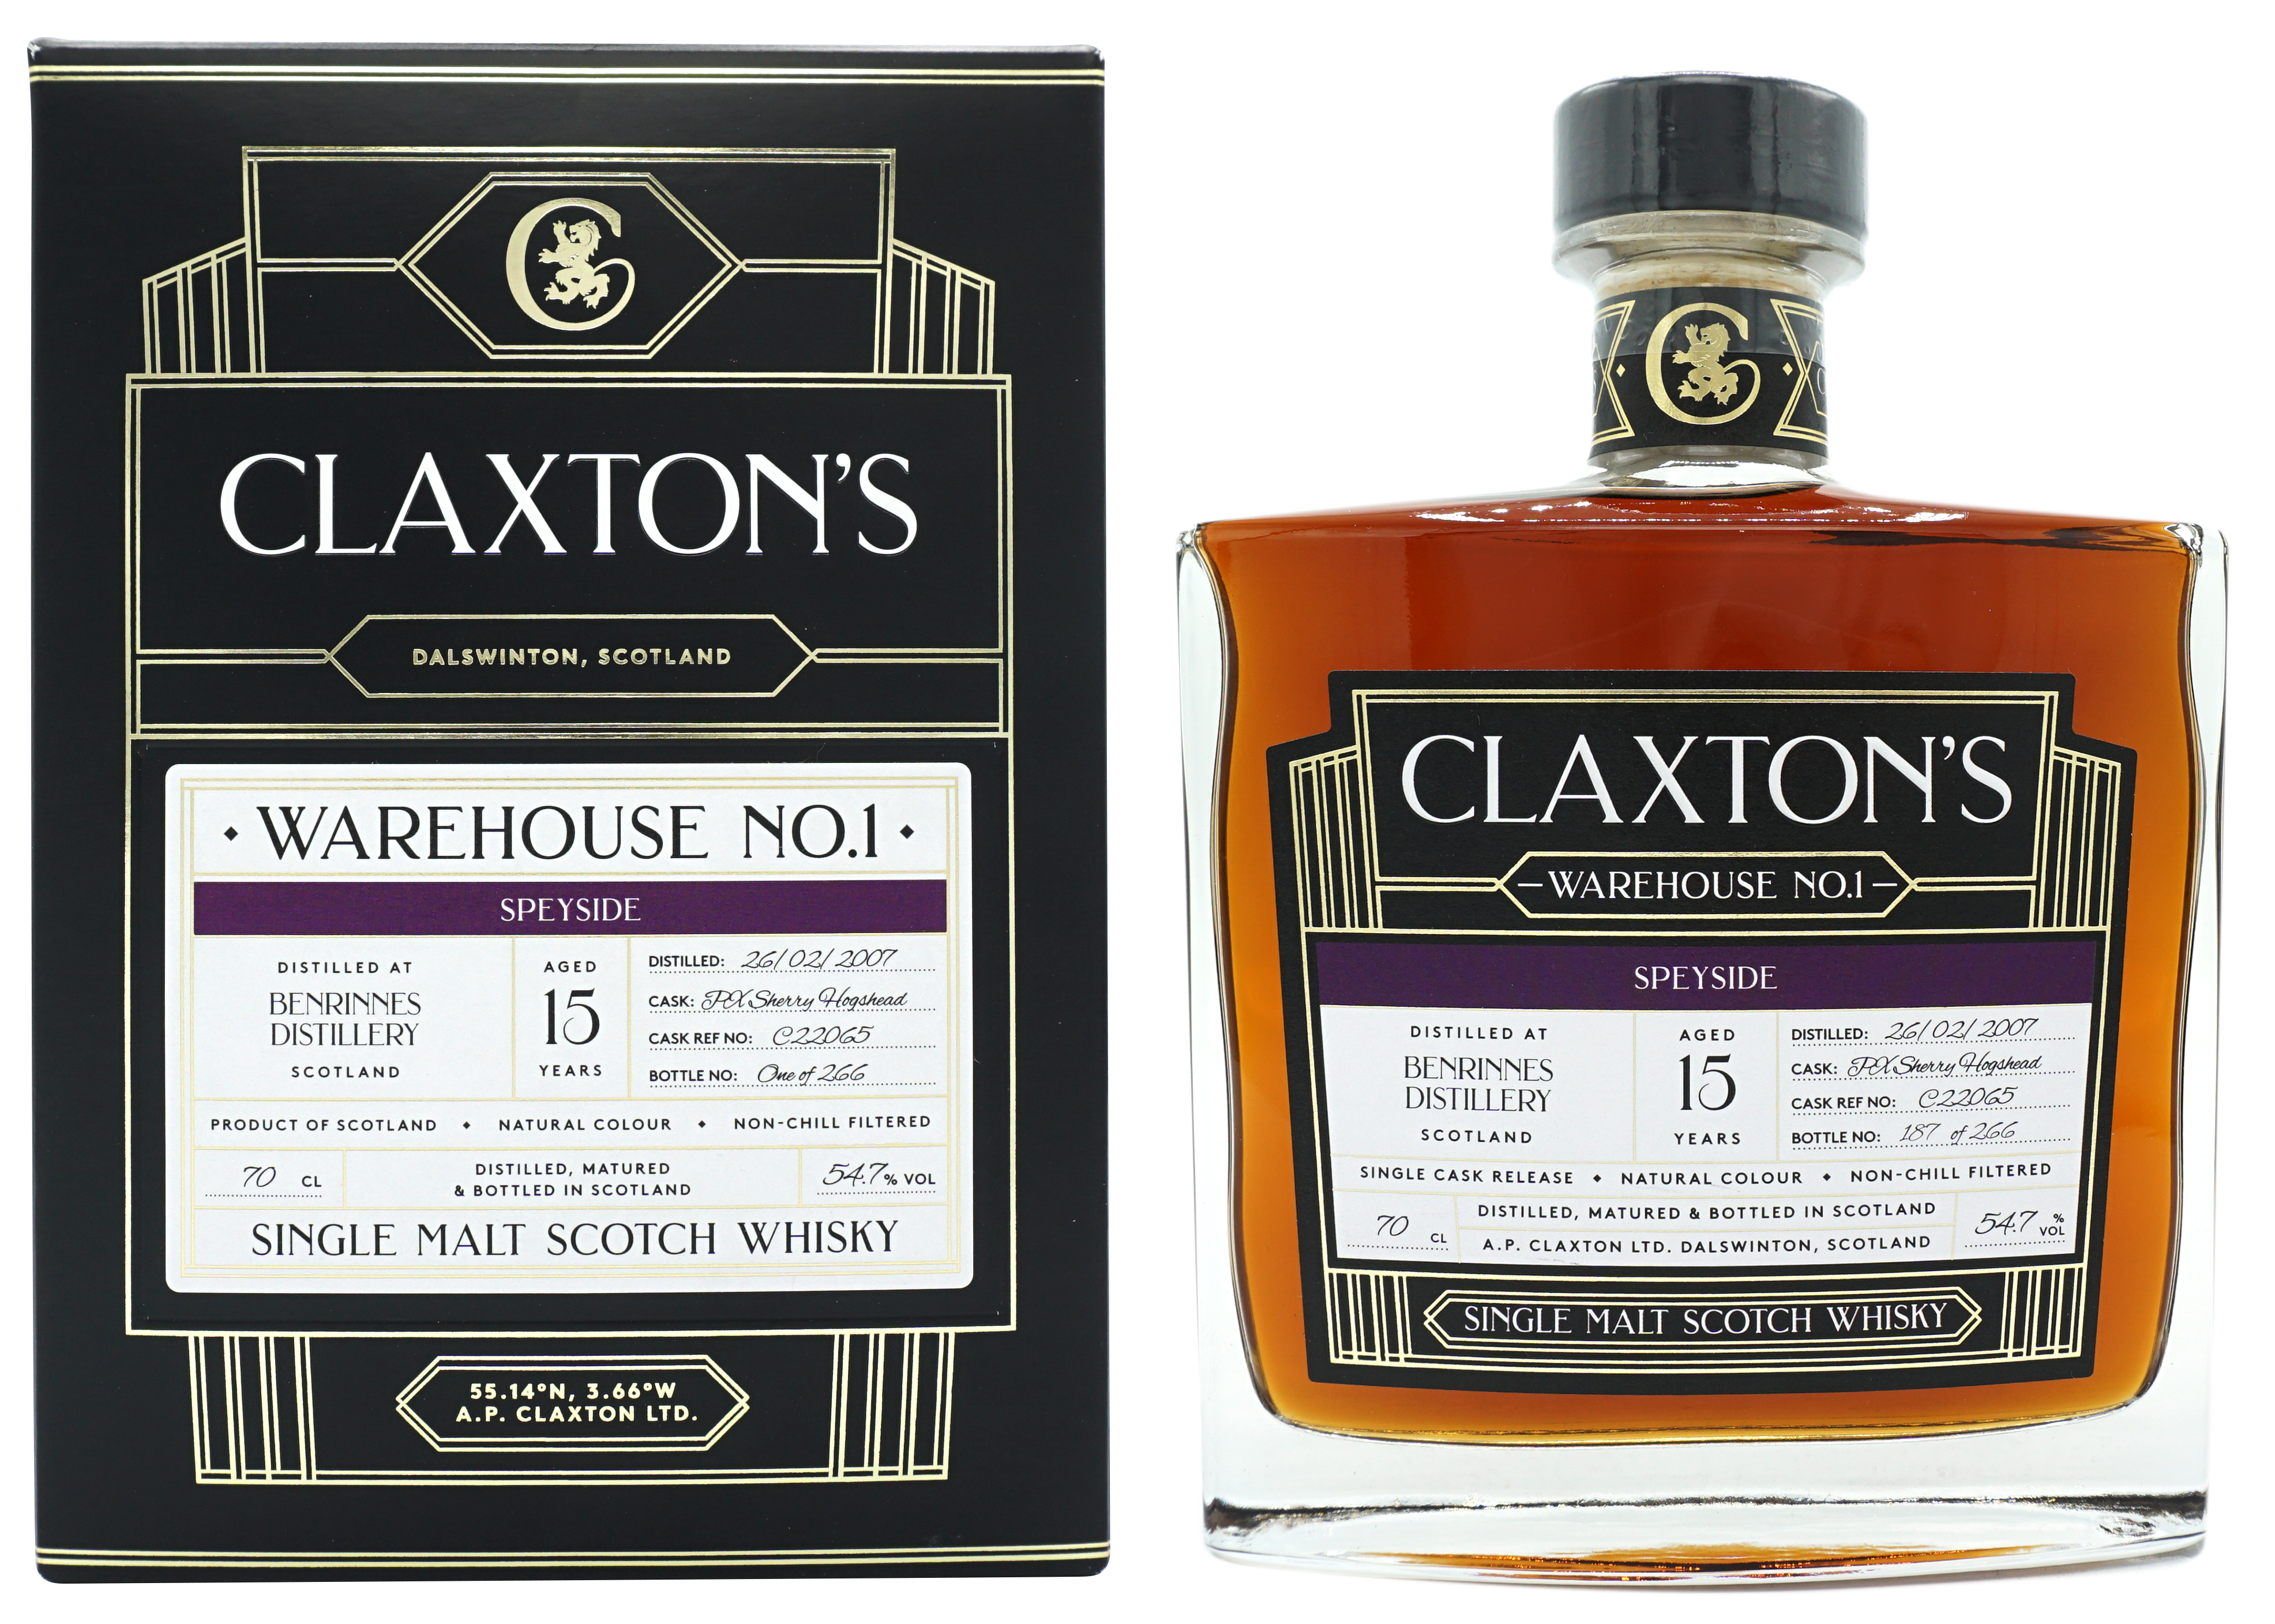 Claxtons Wh1 Benrinnes 2007 15y Single Malt 70cl 547 Compleet V2